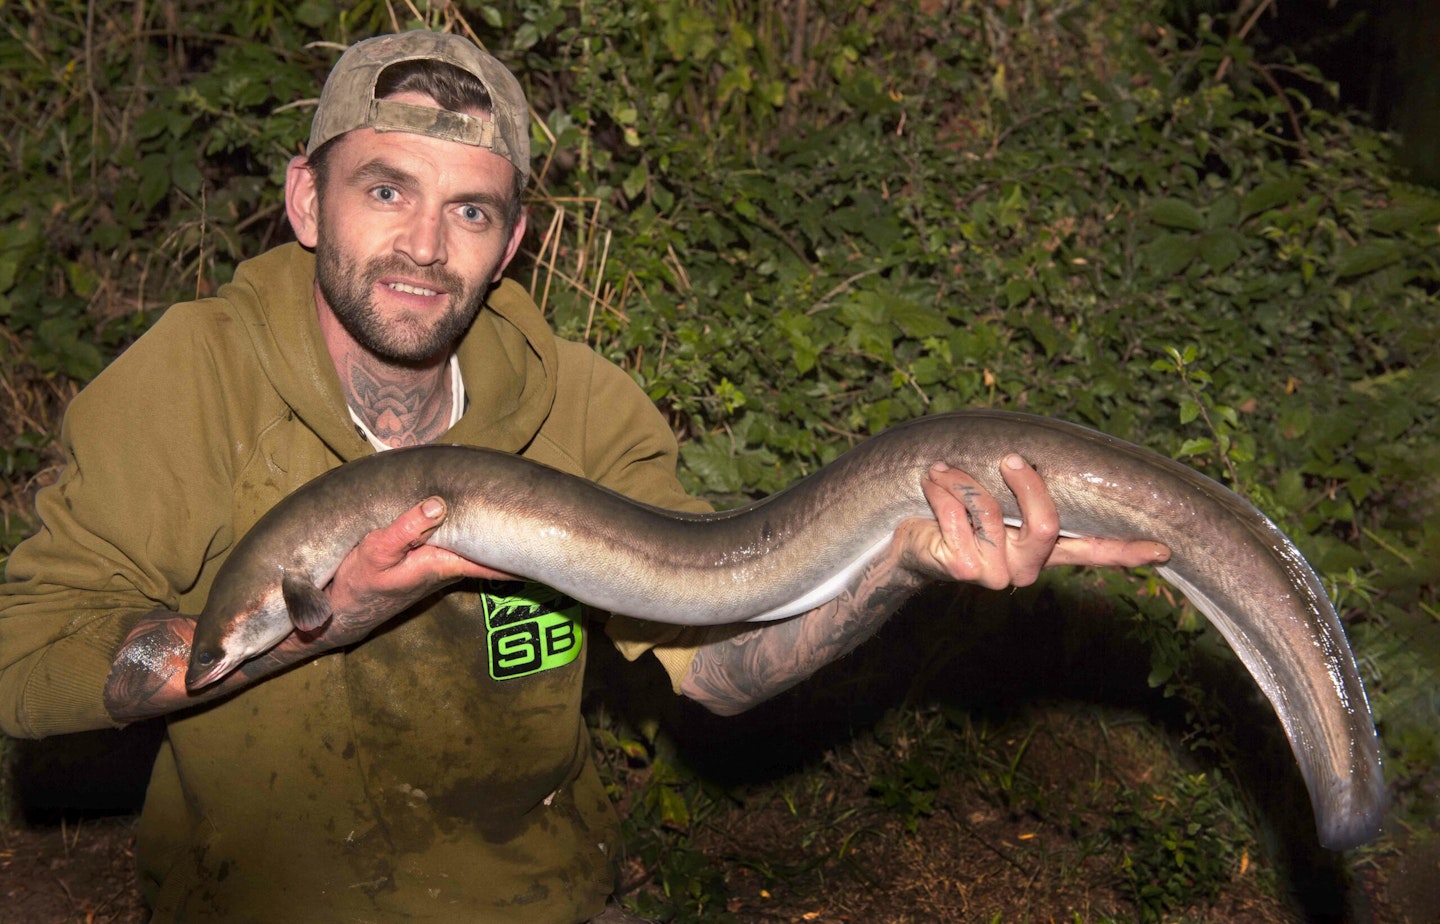 The BIG EELS just keep on coming for Justin!